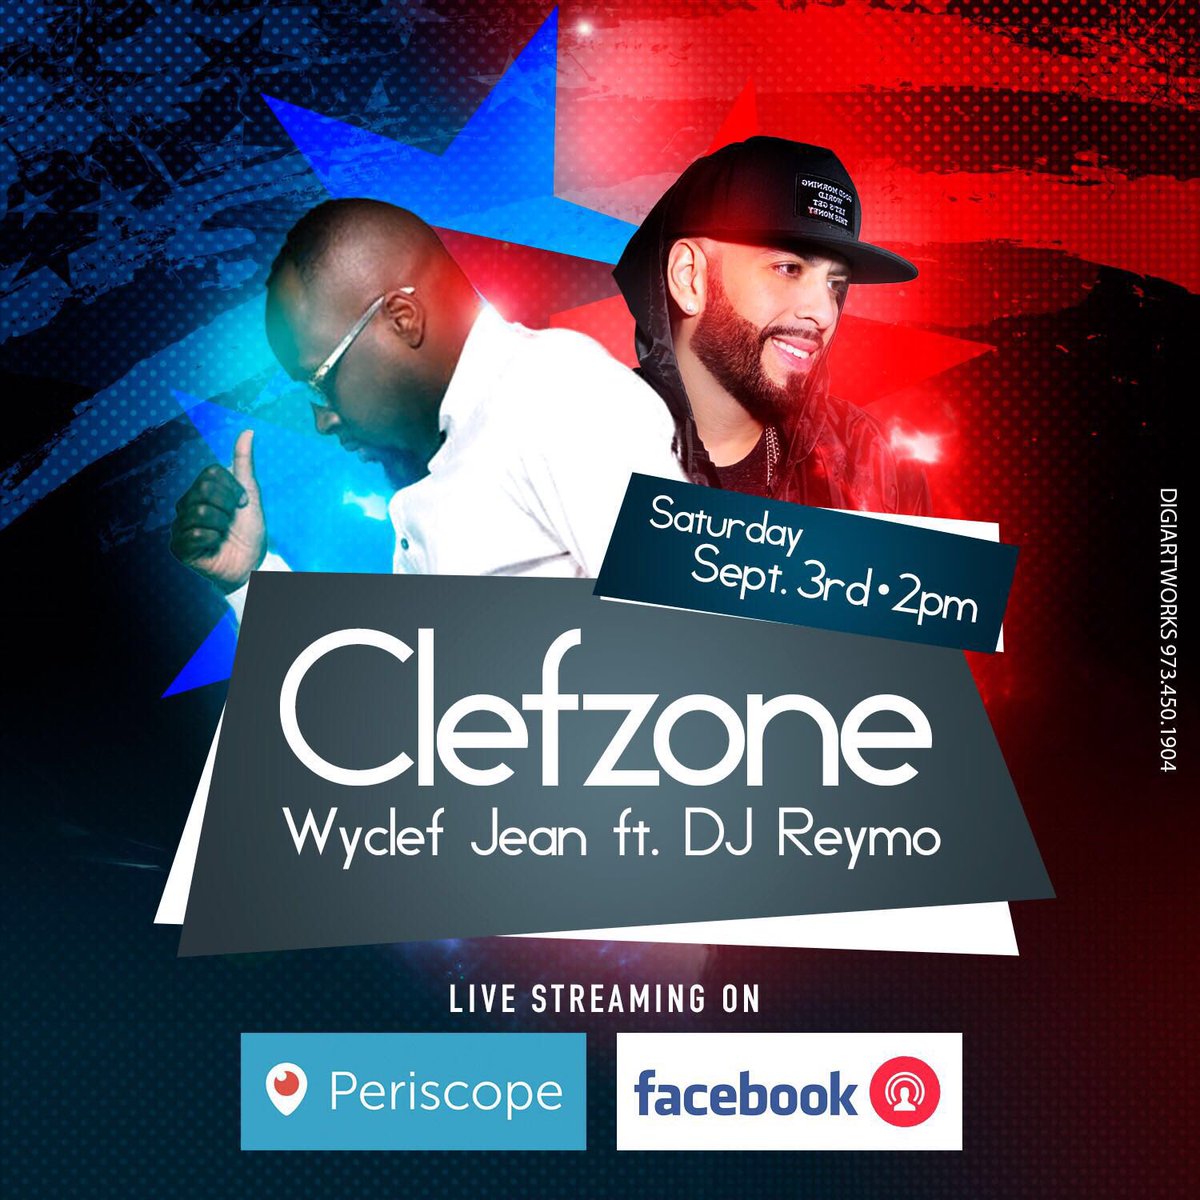 Today's ClefZone - Join @DJREYMO and me at 2pm for a Labor Day Jam Session Periscope Take Over https://t.co/LgfPqpN4dL